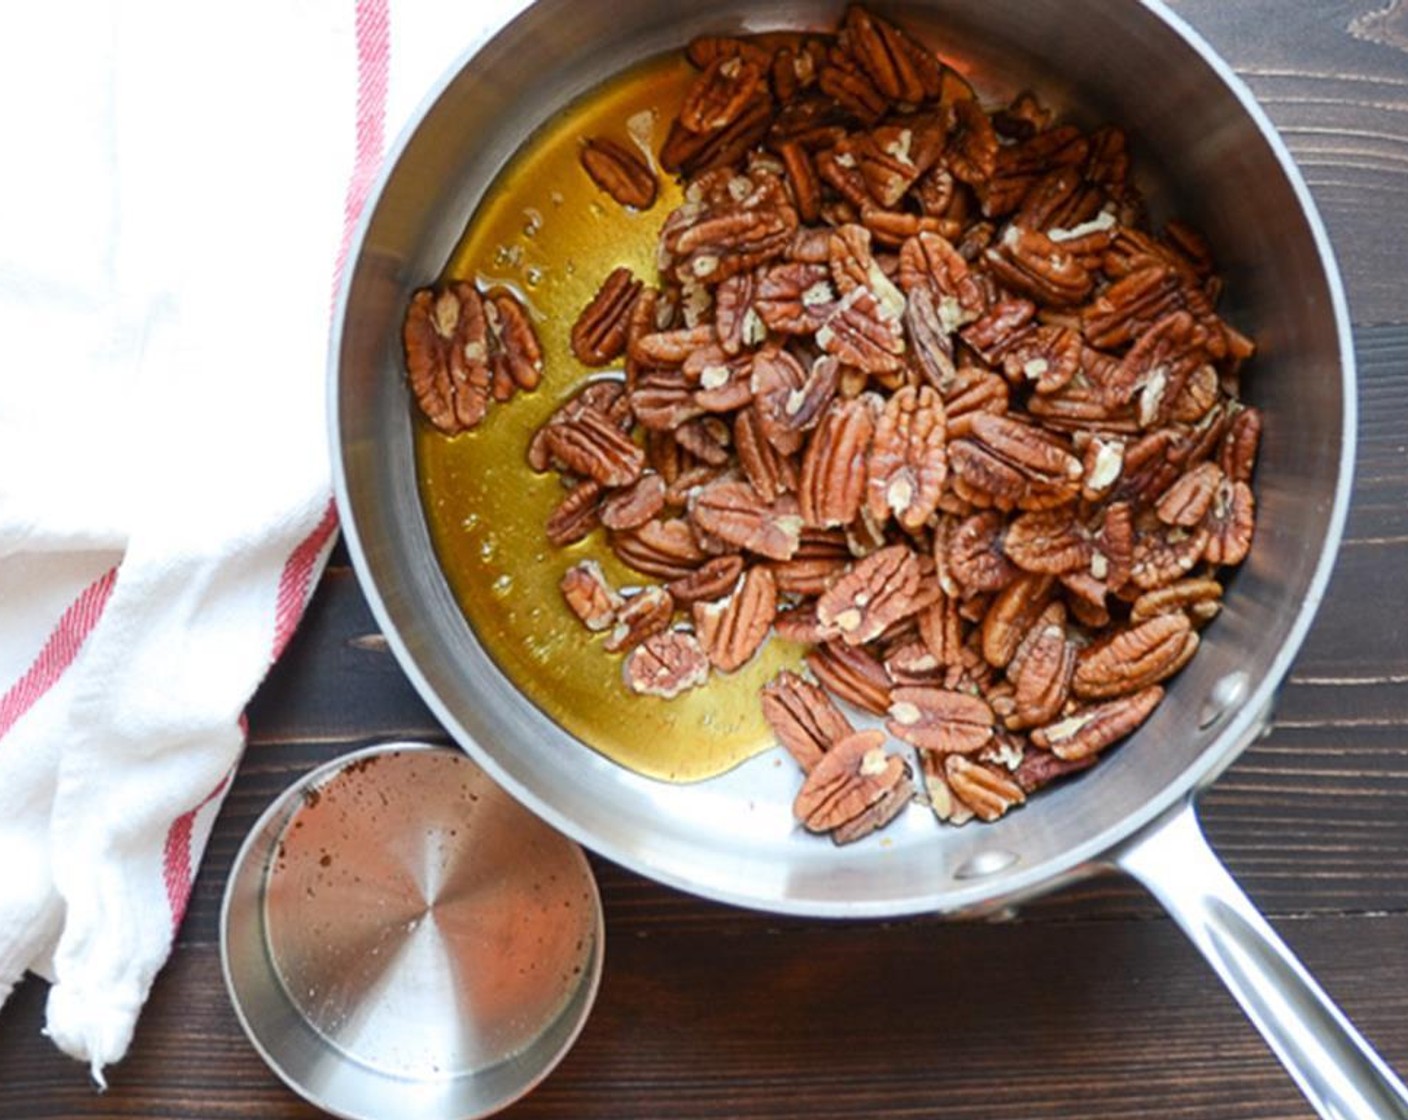 step 1 Lay a piece of parchment paper on a baking sheet. Add Pecans (2 cups), Honey (2 Tbsp), Maple Syrup (2 Tbsp), Cayenne Pepper (1 dash), and Salt (1/4 tsp) into a heavy, medium-sized saucepan.